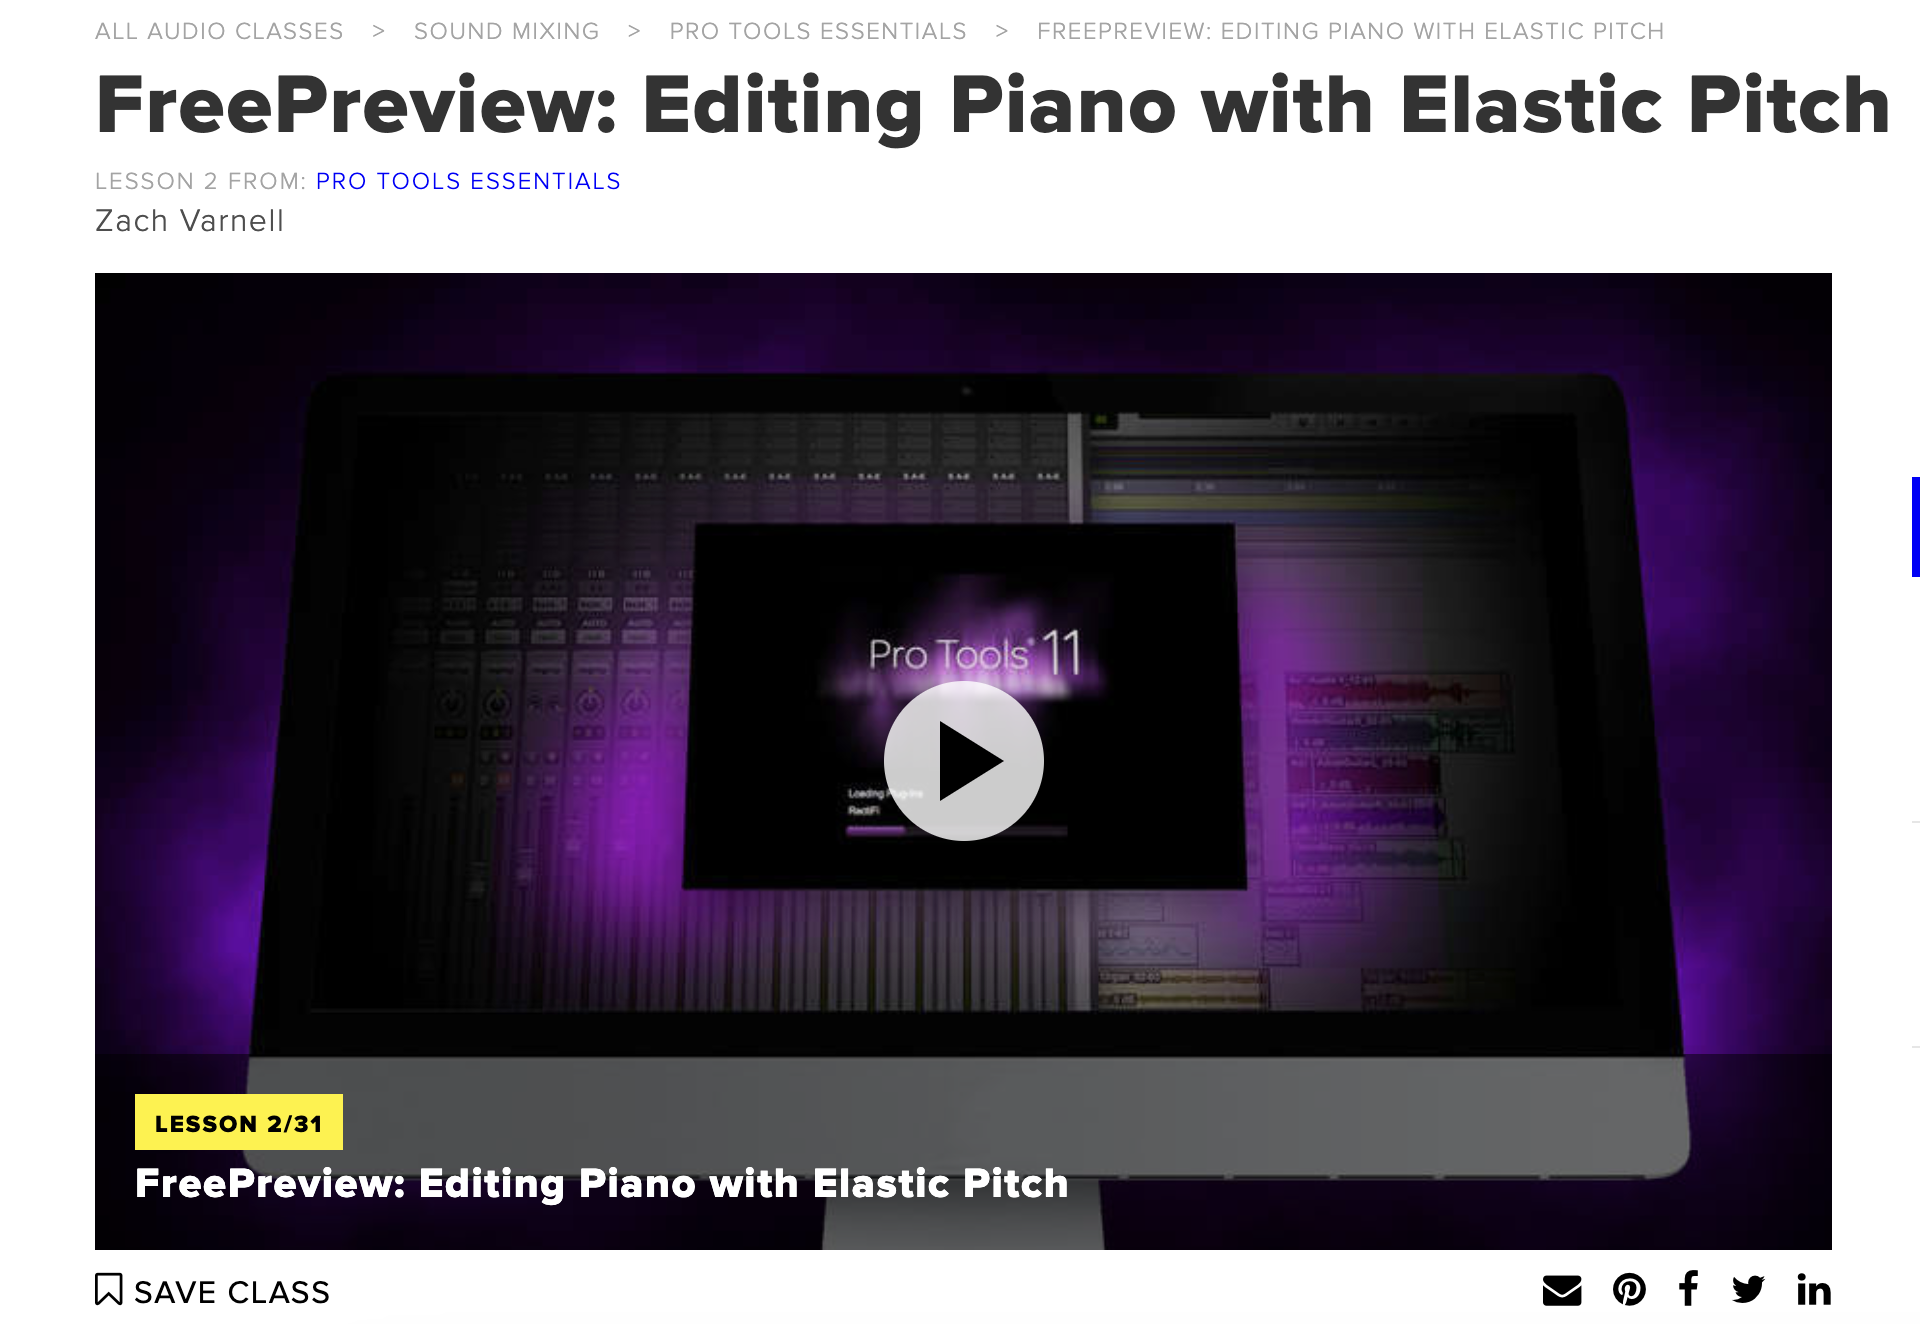 Editing Piano with Elastic Pitch by Creative Live